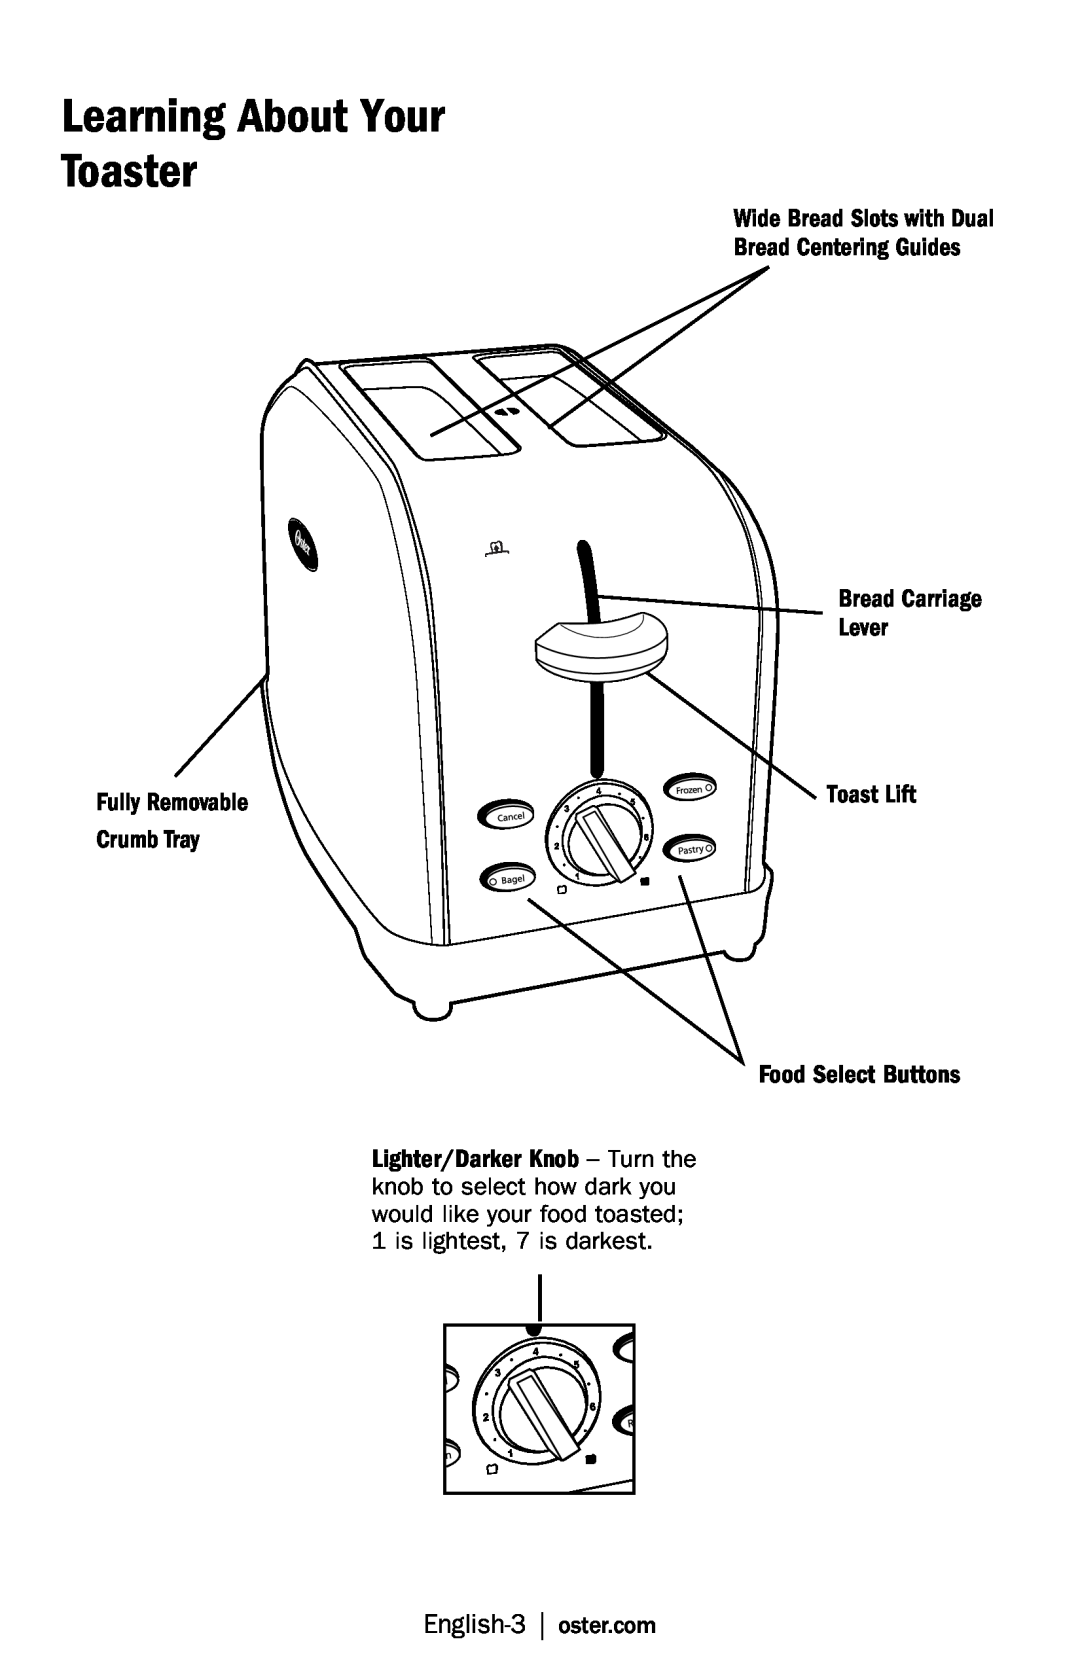 Oster TSSTTRWF2S user manual Learning About Your Toaster, Fully Removable Crumb Tray, Bread Carriage Lever Toast Lift 